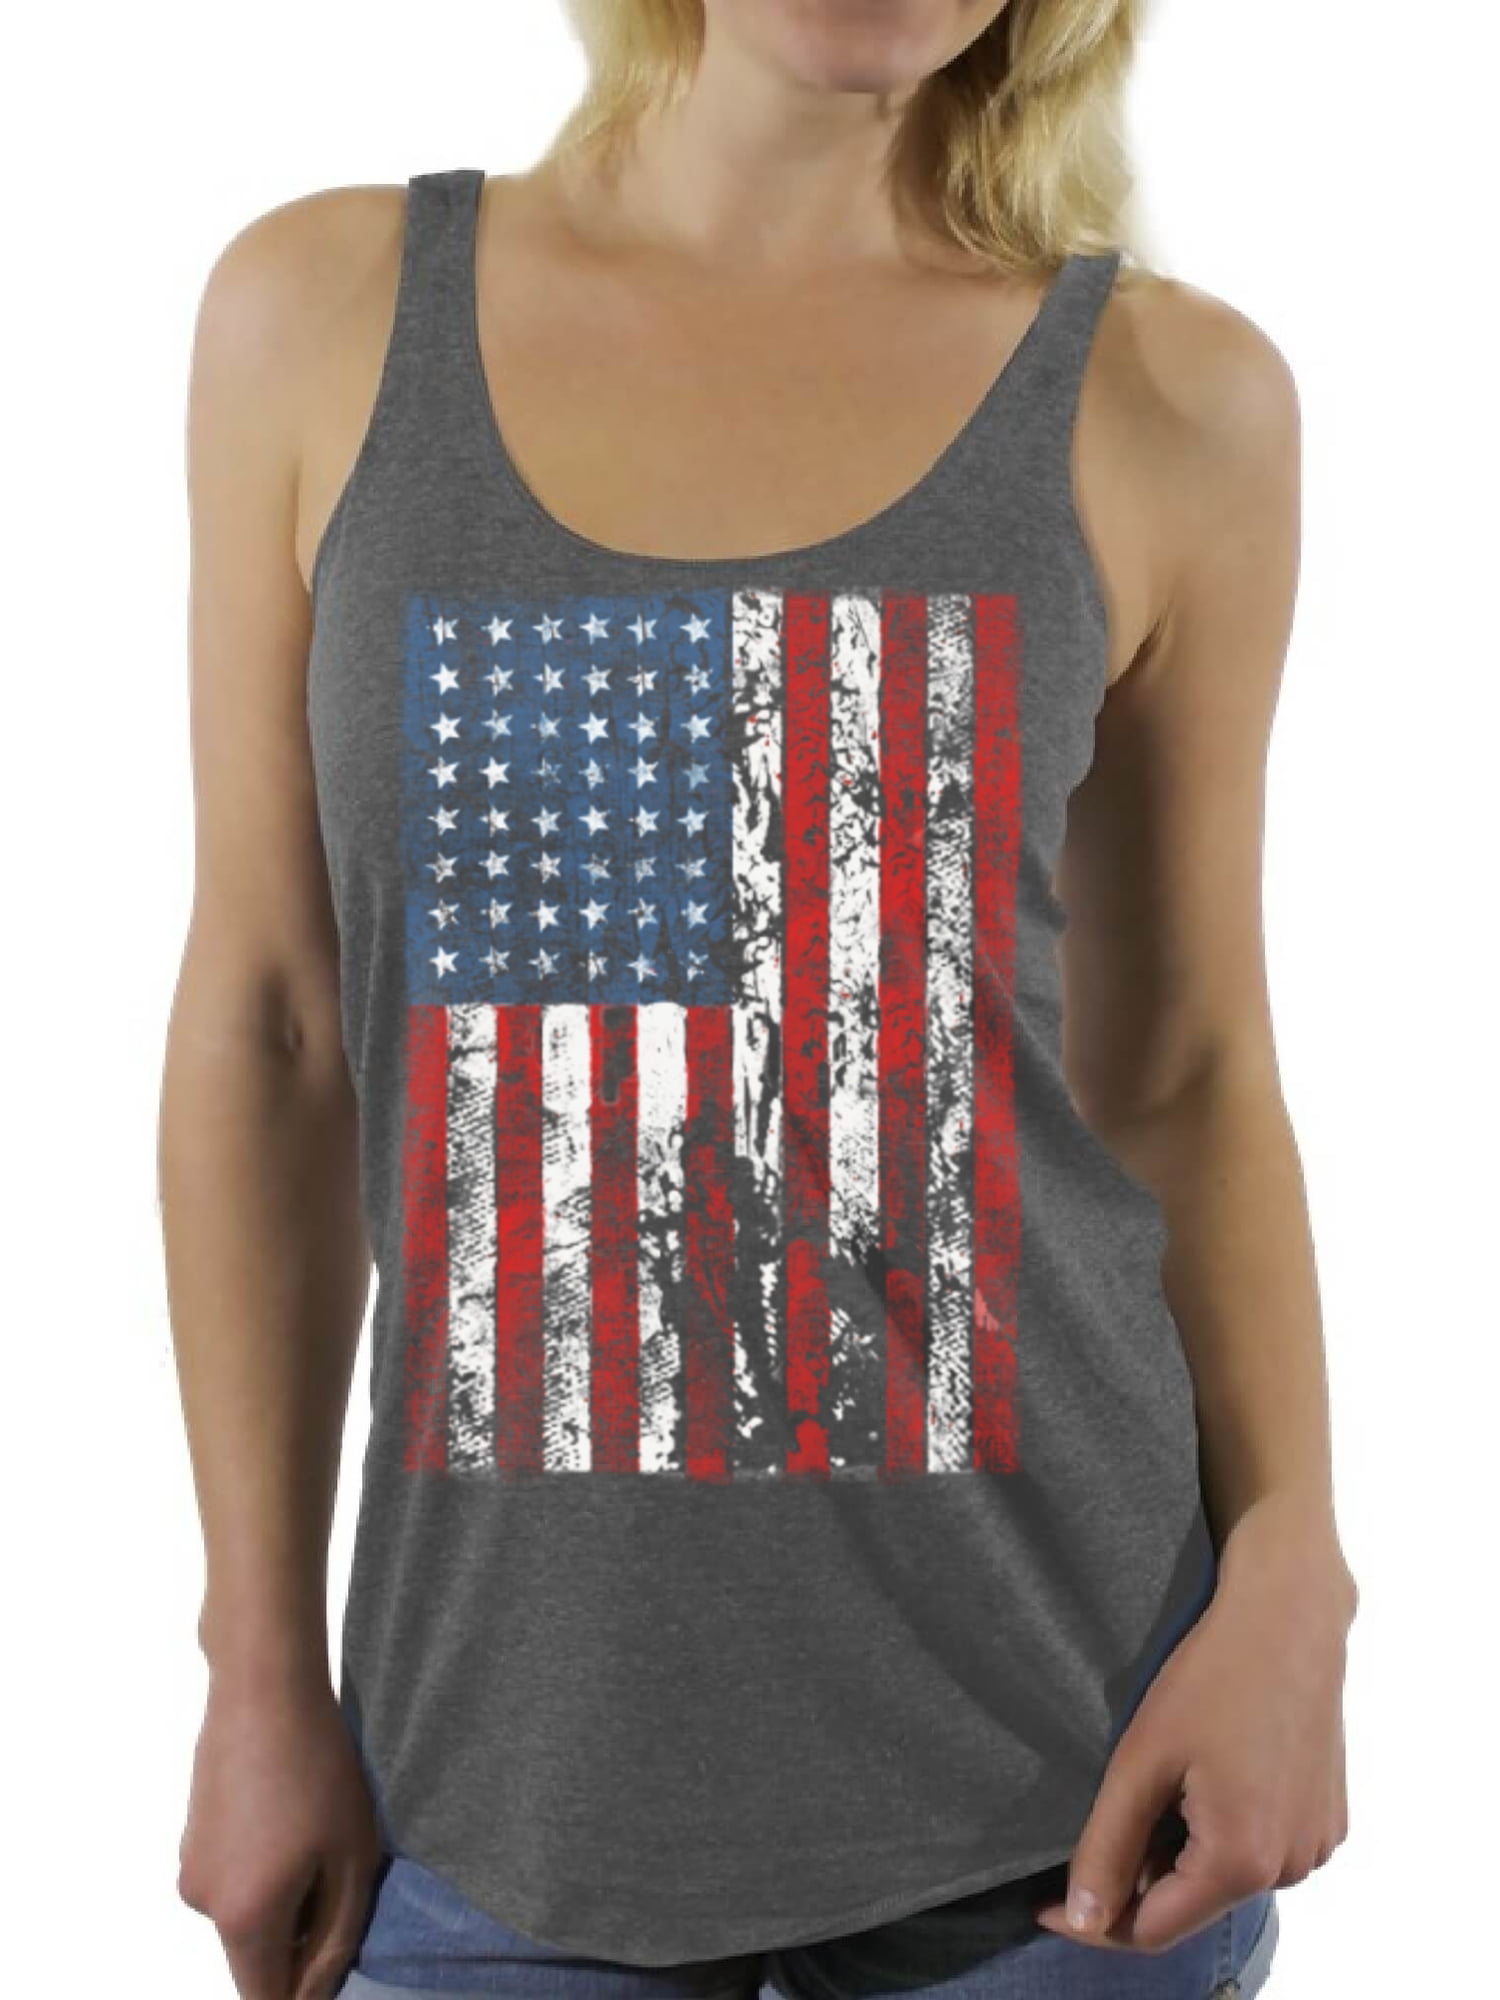 Gueuusu 4th of July Mommy and Me American Flag Striped Stars Tank Tops Cami Vest Sleeveless Shirts